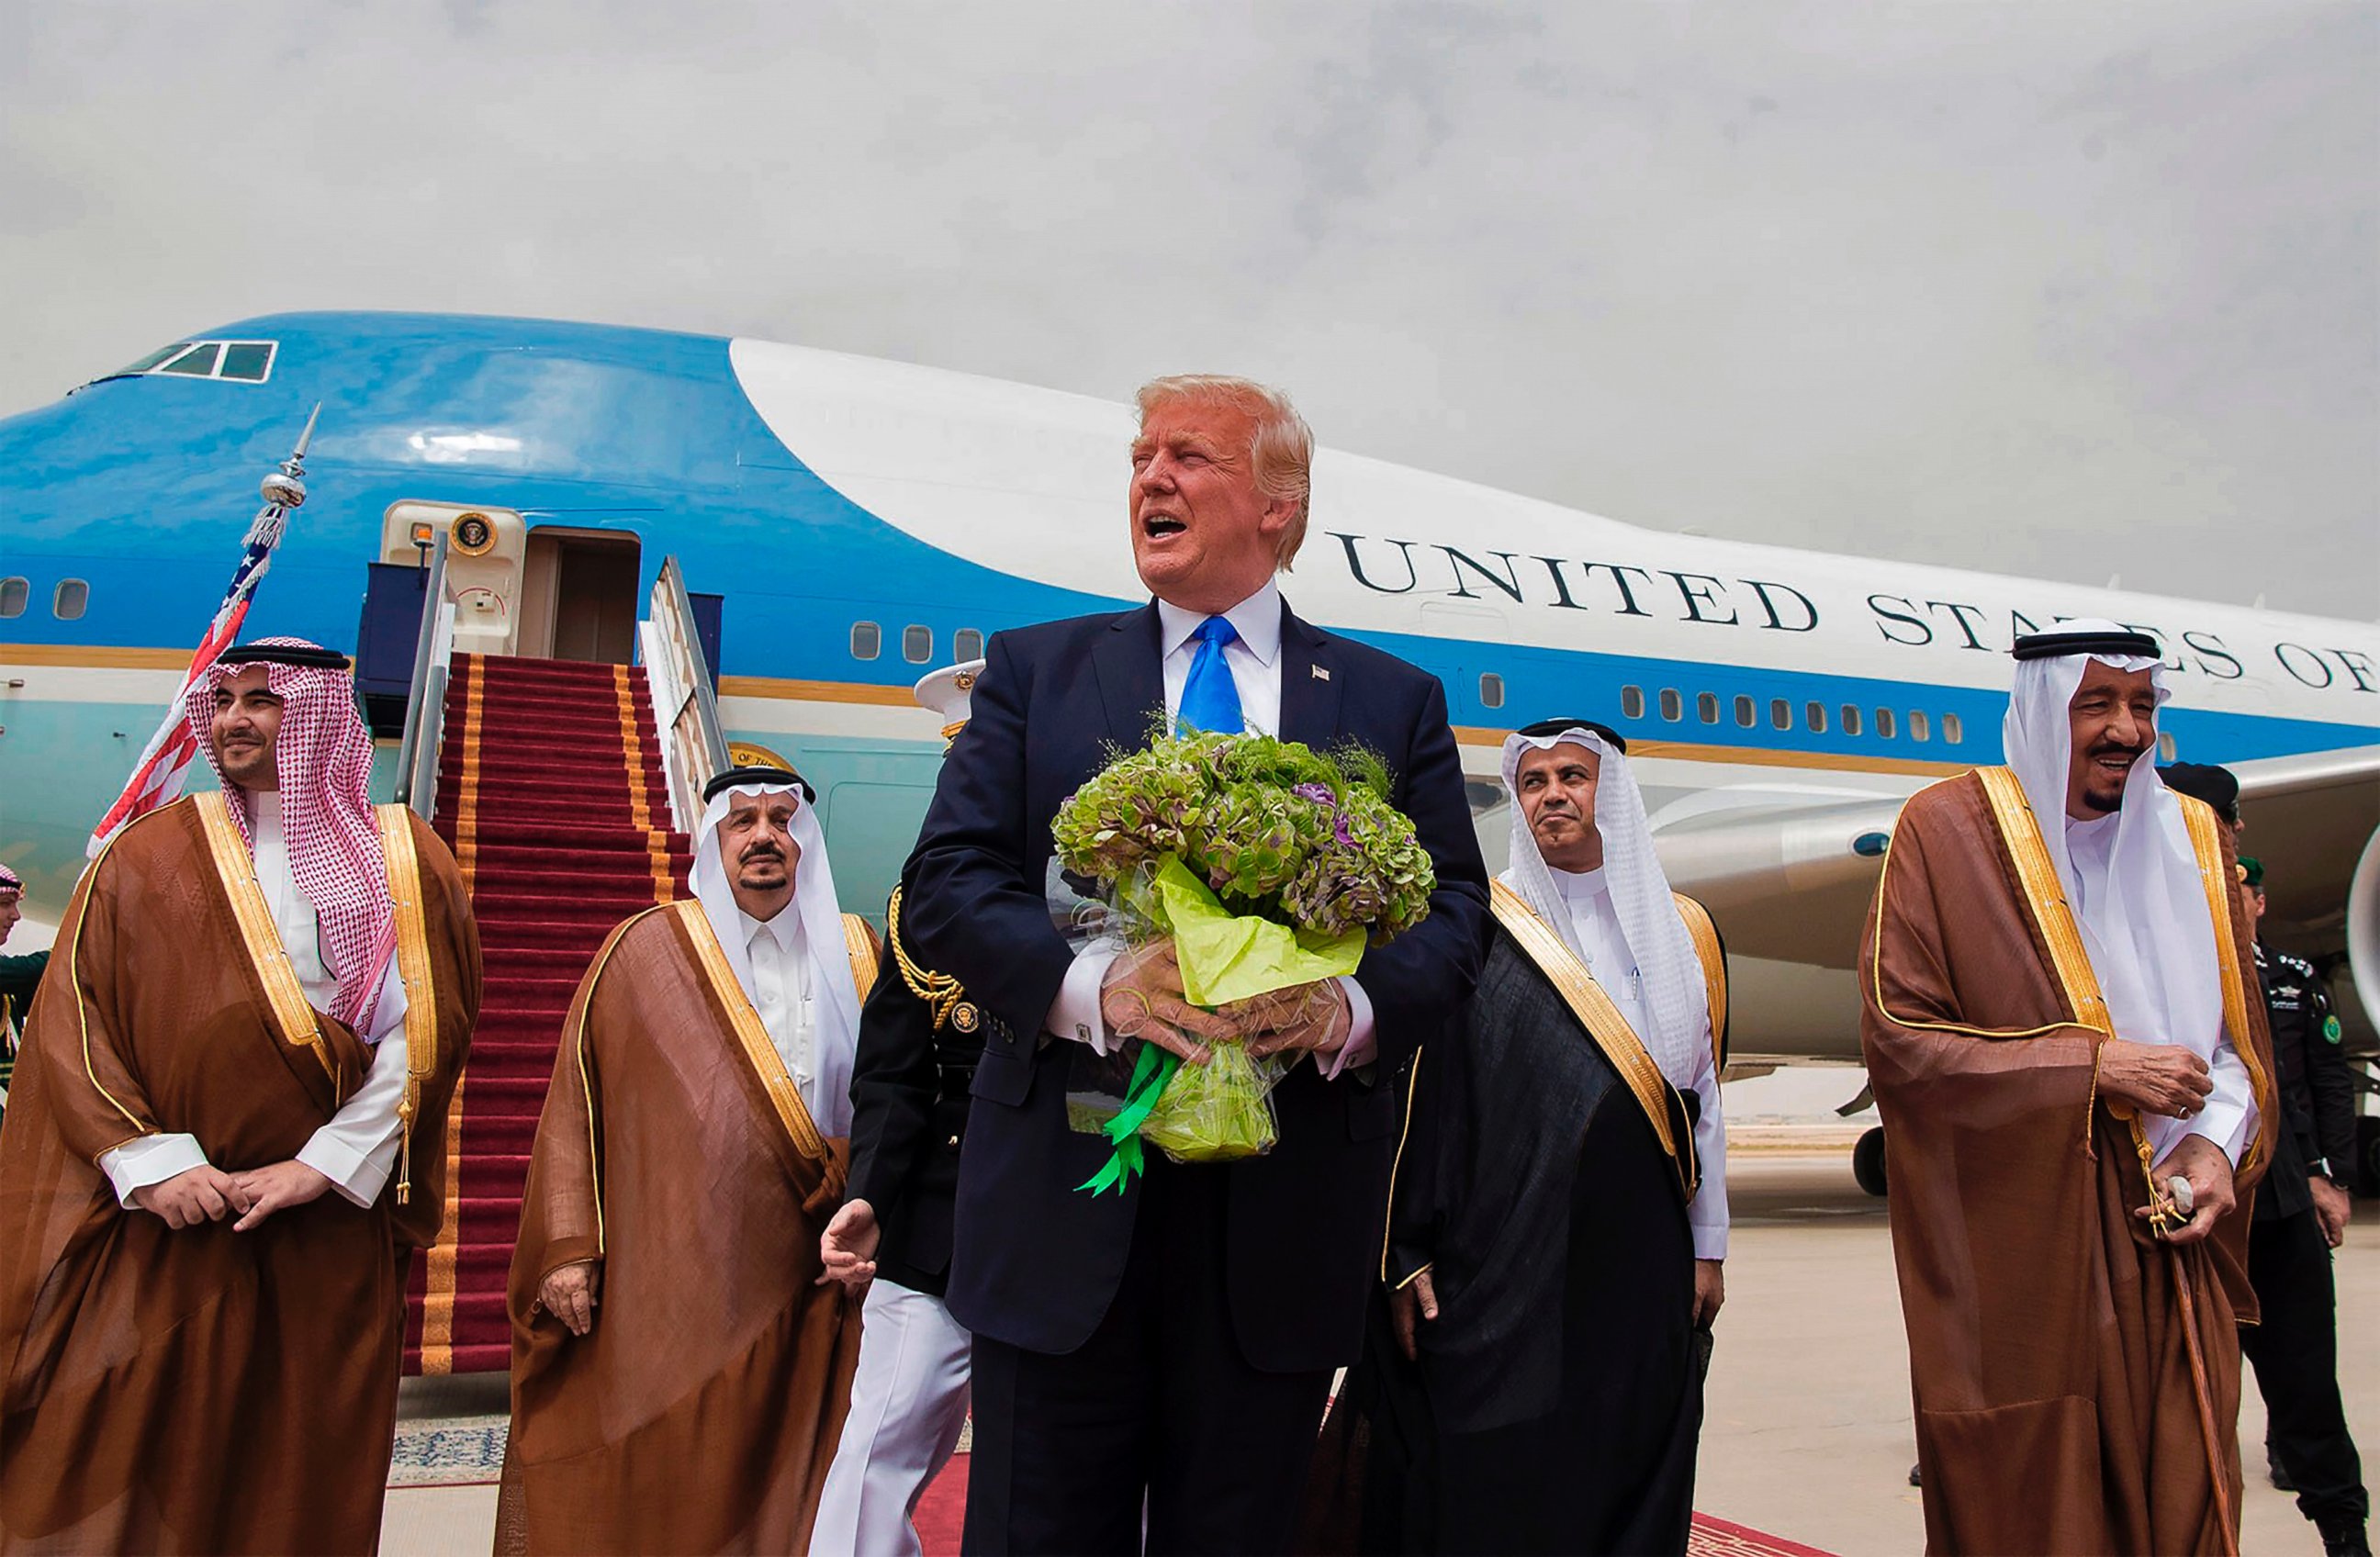 PHOTO: President Donald Trump holds a bouquet of flowers upon being welcomed by Saudi King Salman bin Abdulaziz al-Saud during his arrival at the airport in Riyadh on May 20, 2017.